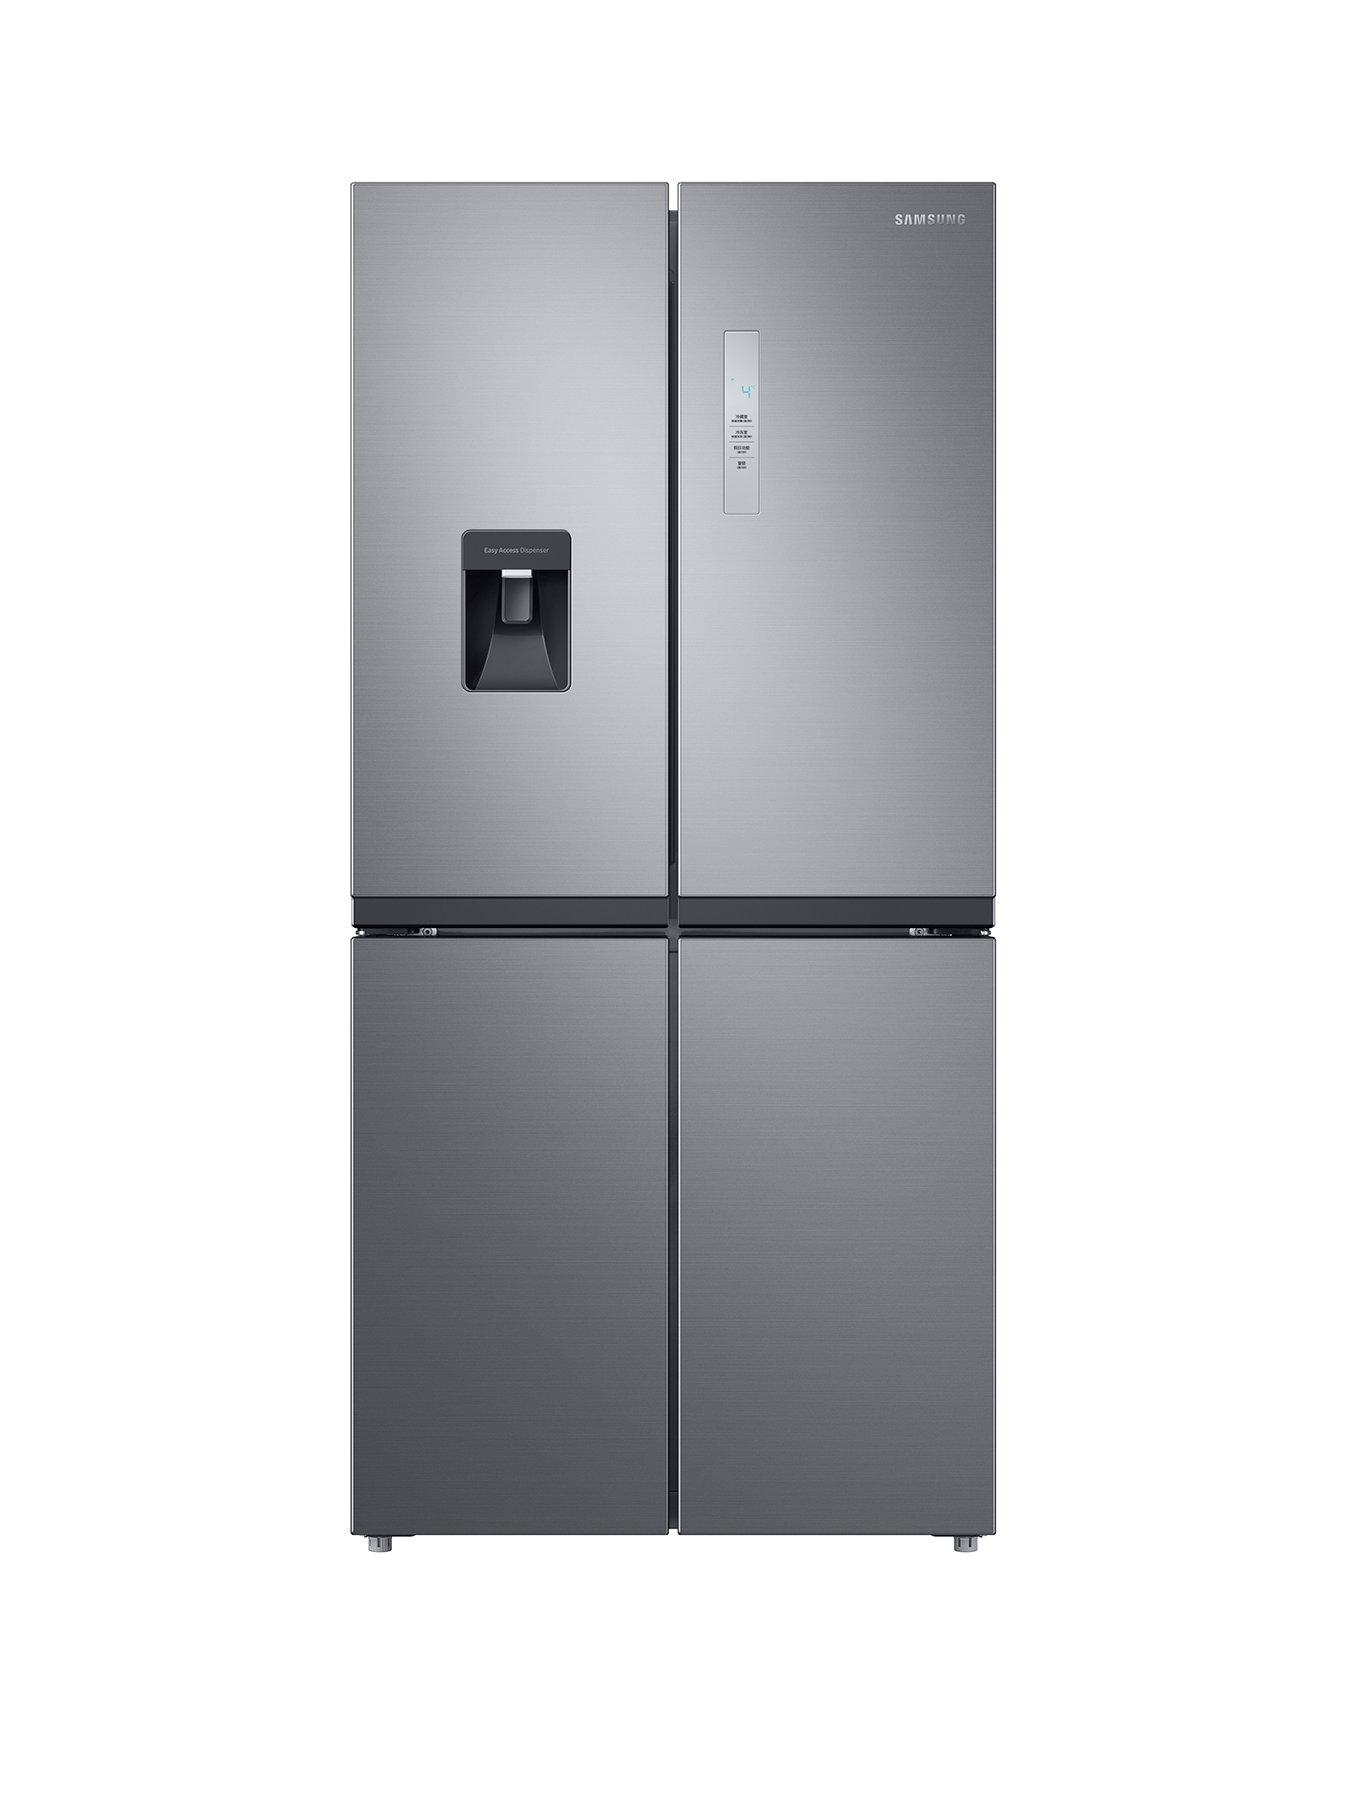 Samsung Rf48A401Em9/Eu French Style Fridge Freezer With Twin Cooling Plus - E Rated - Gentle Silver Matt